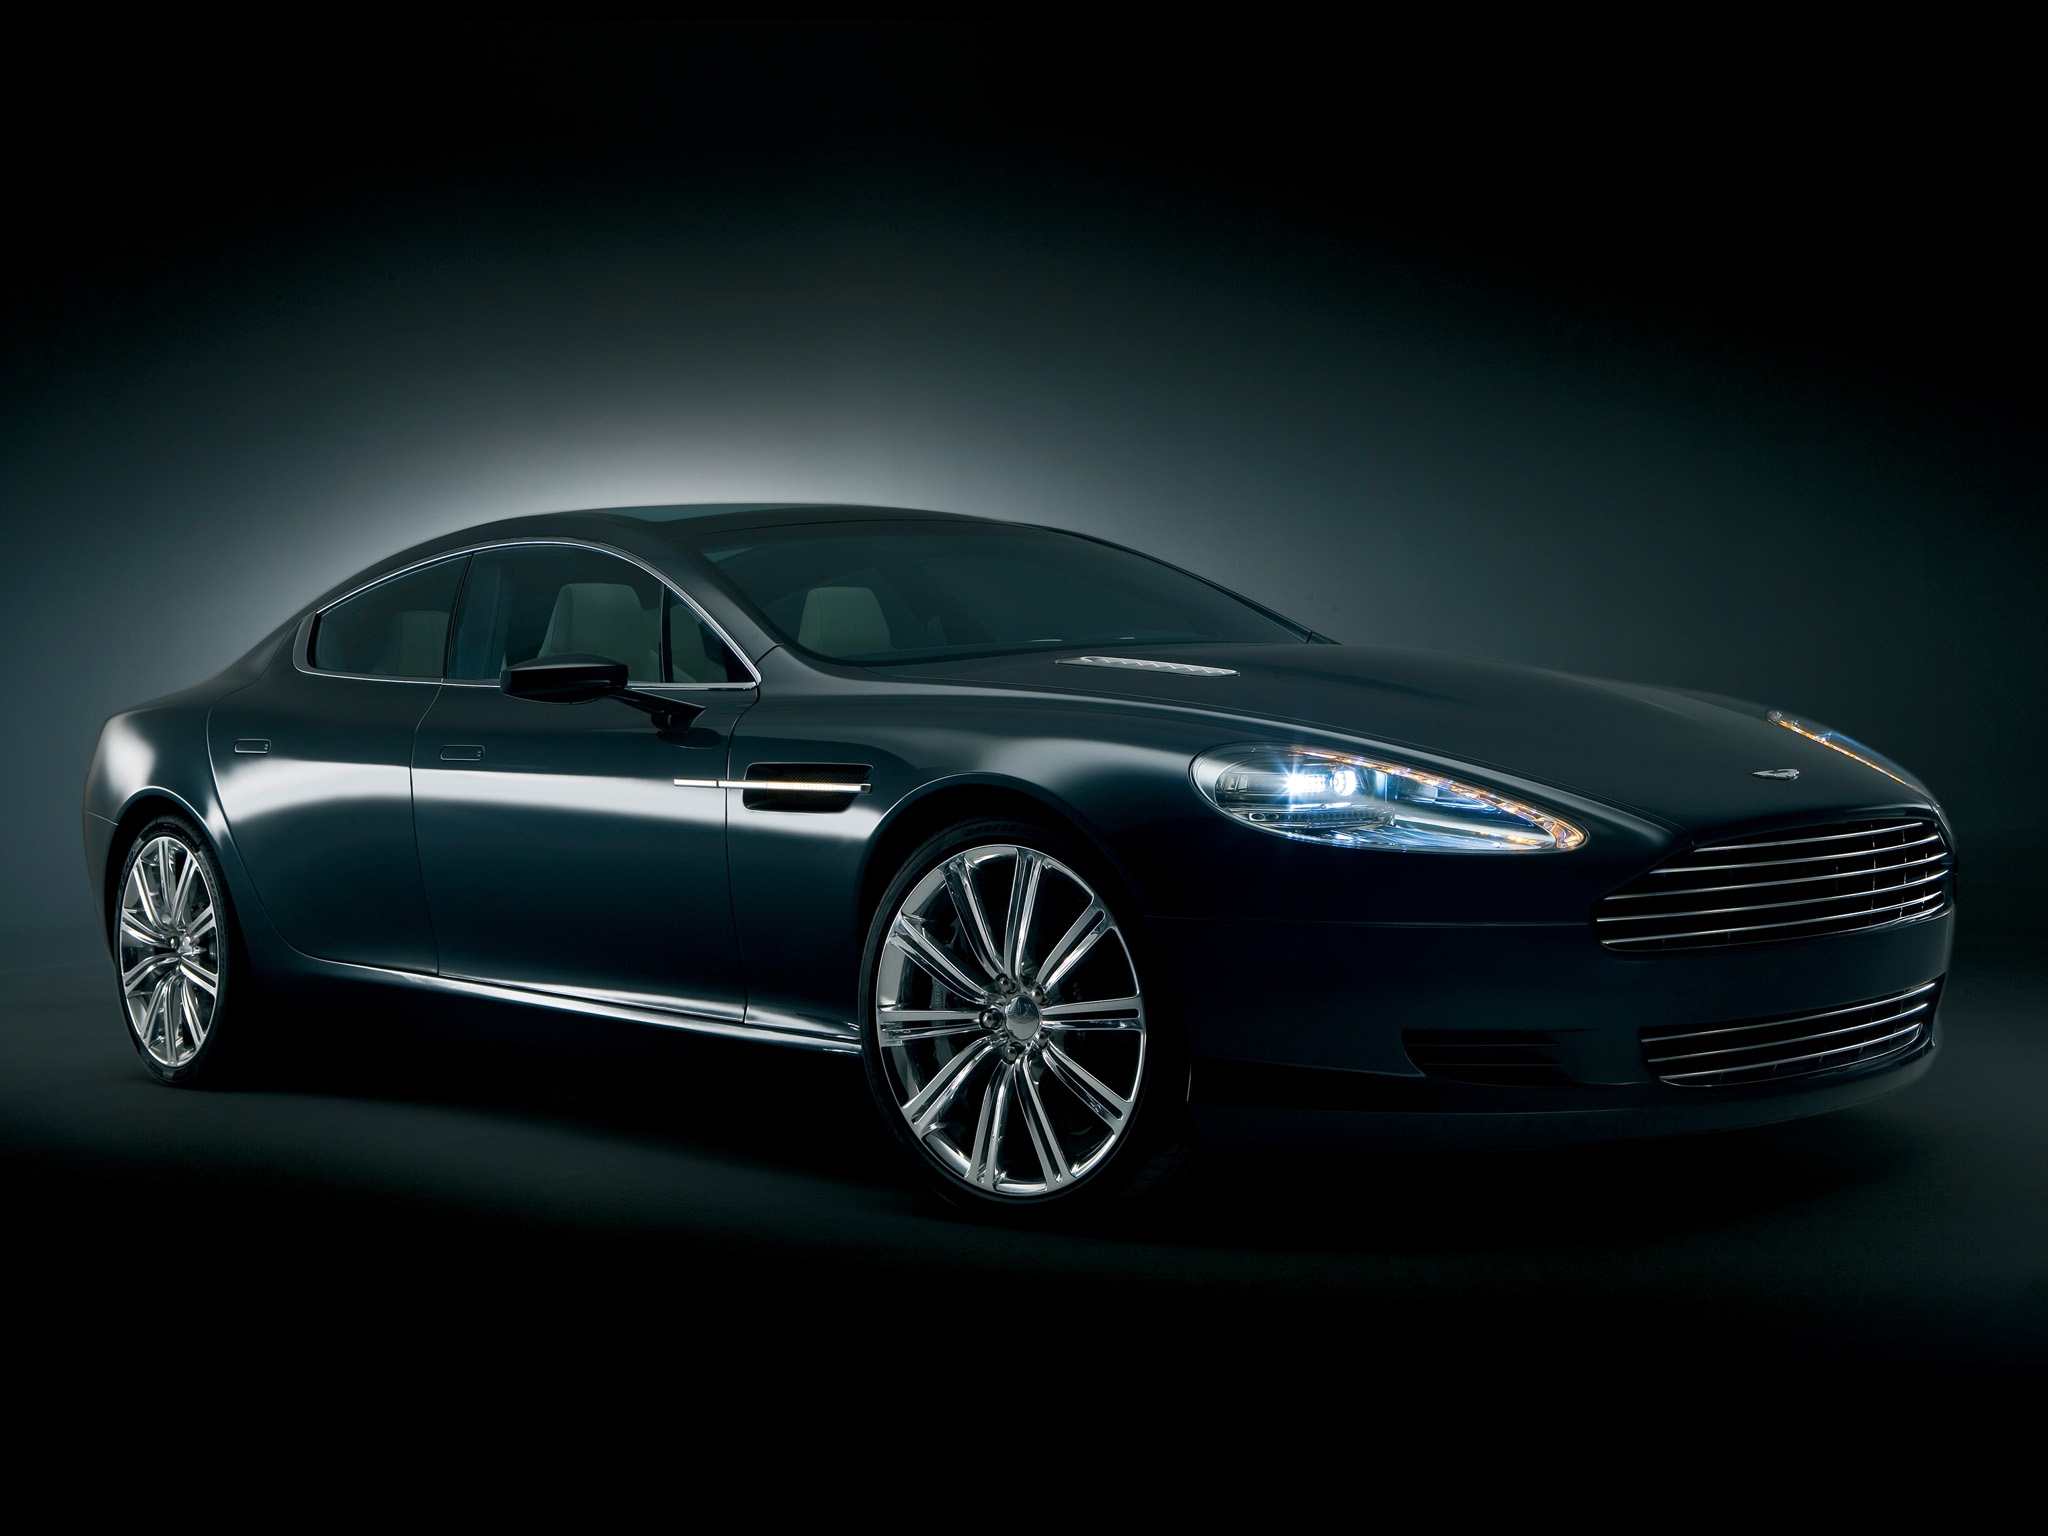 89652 download wallpaper aston martin, cars, black, side view, style, concept car, 2006, rapide screensavers and pictures for free